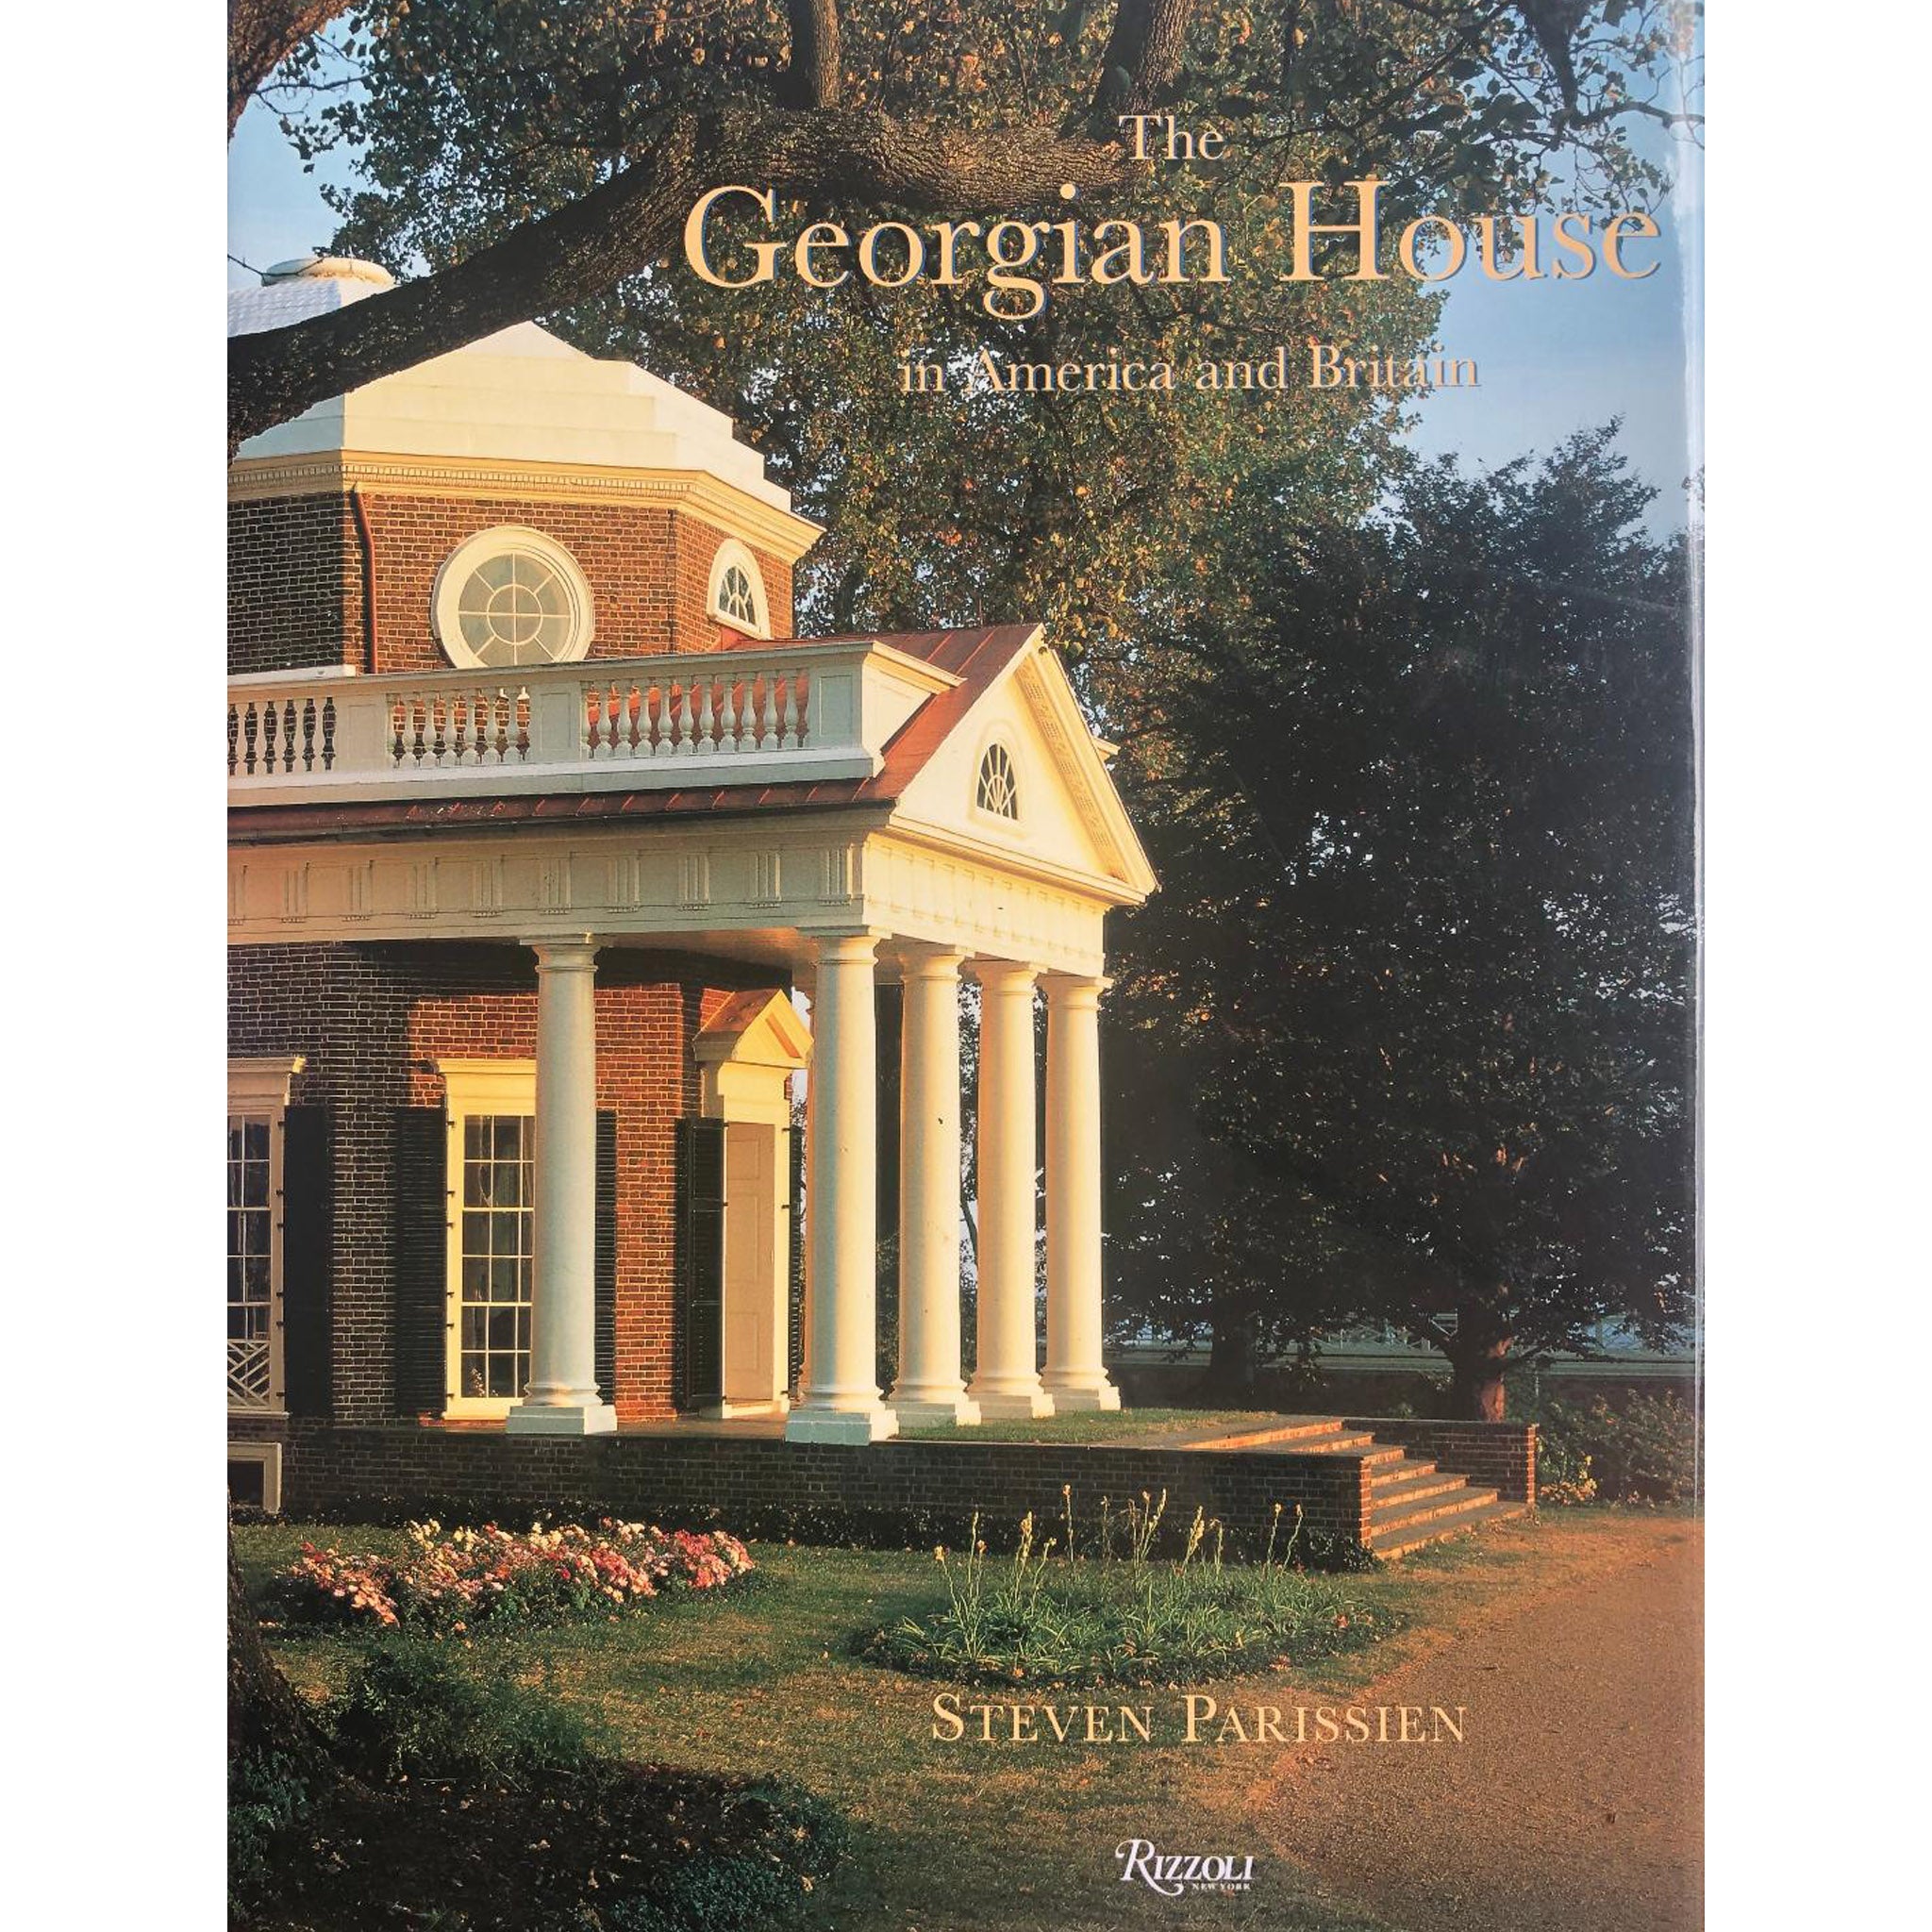 The Georgian House in America and Britain